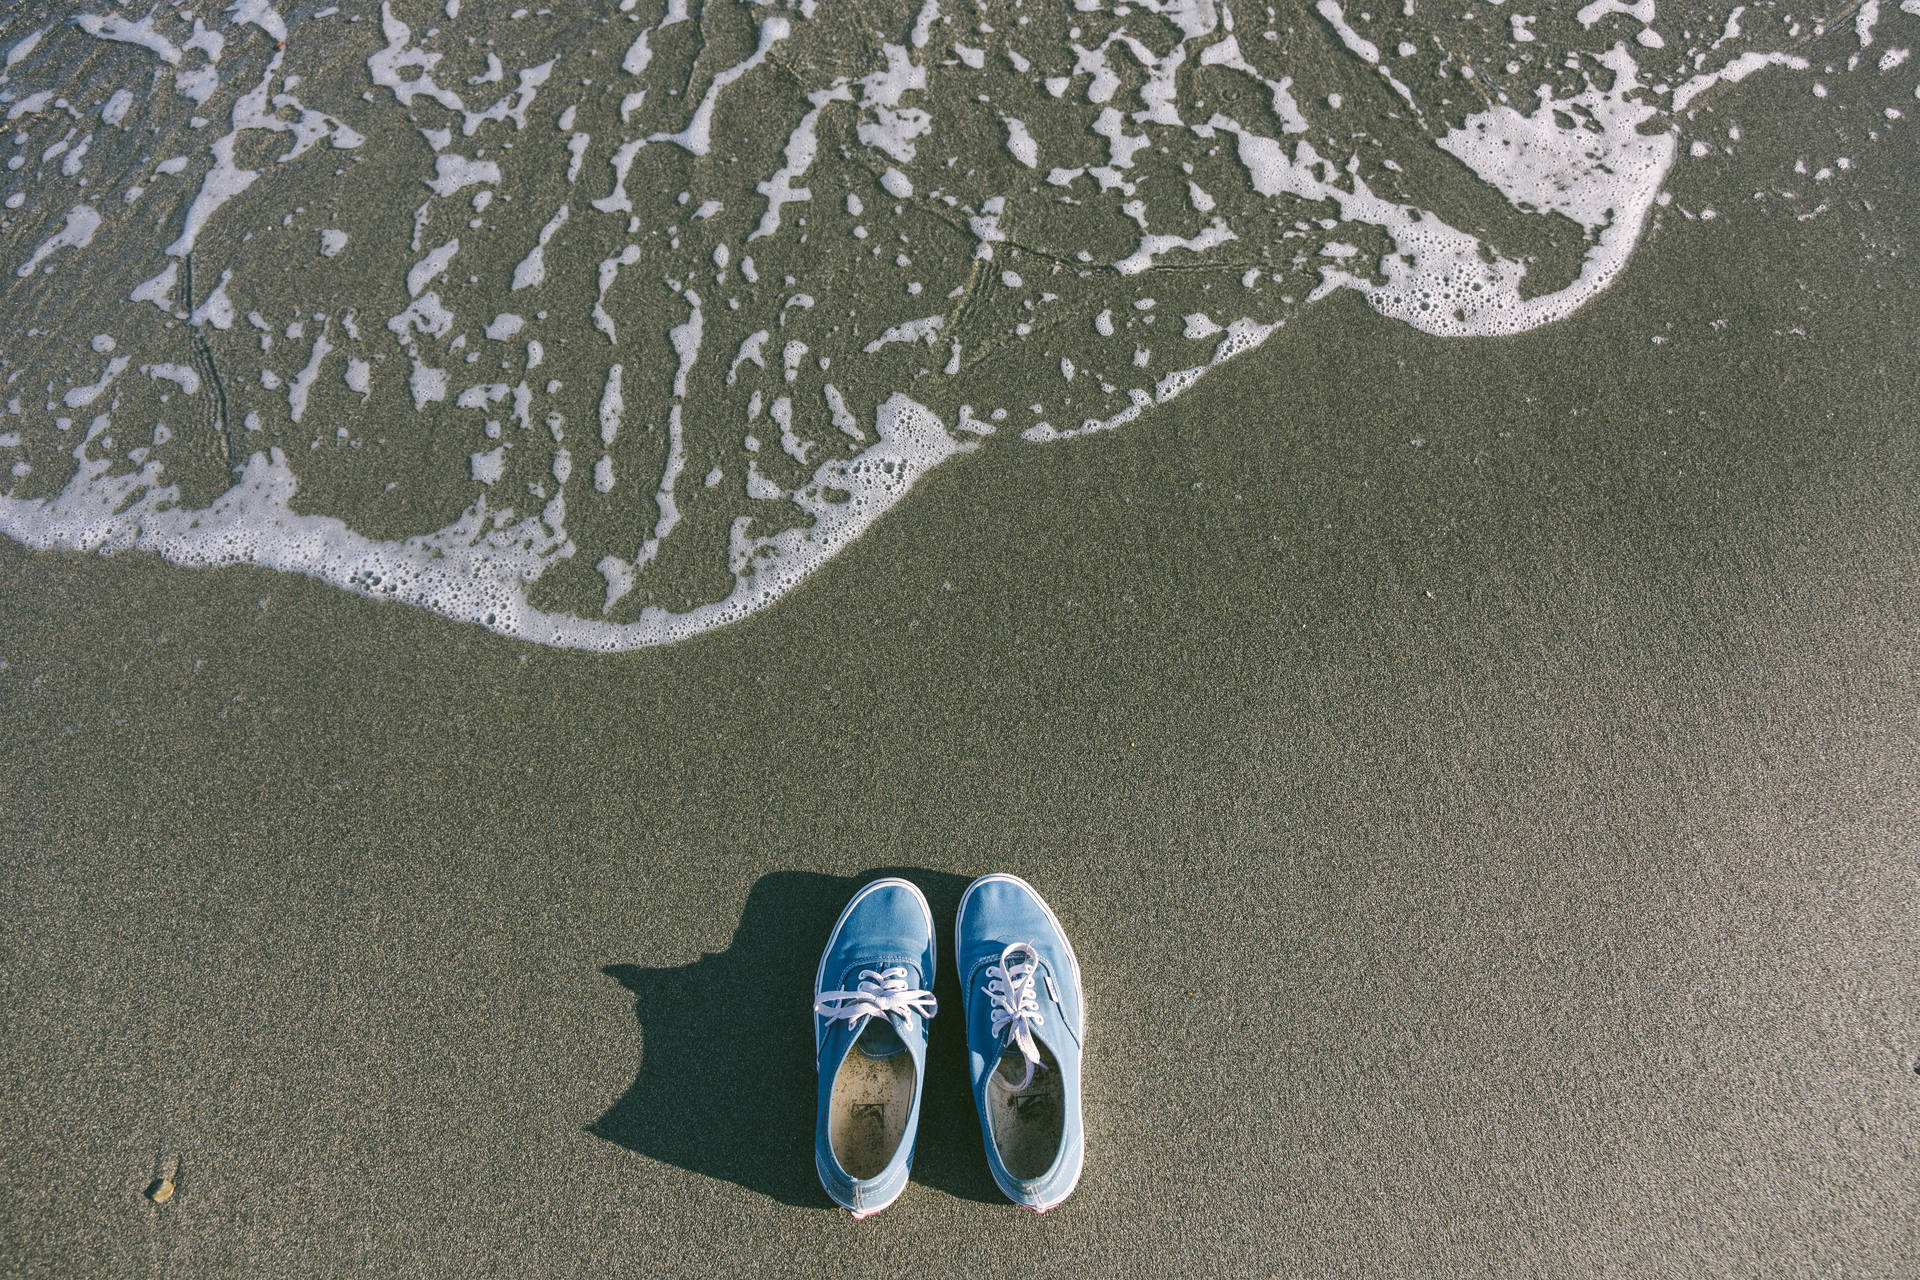 Blue Shoes By The Beach Background